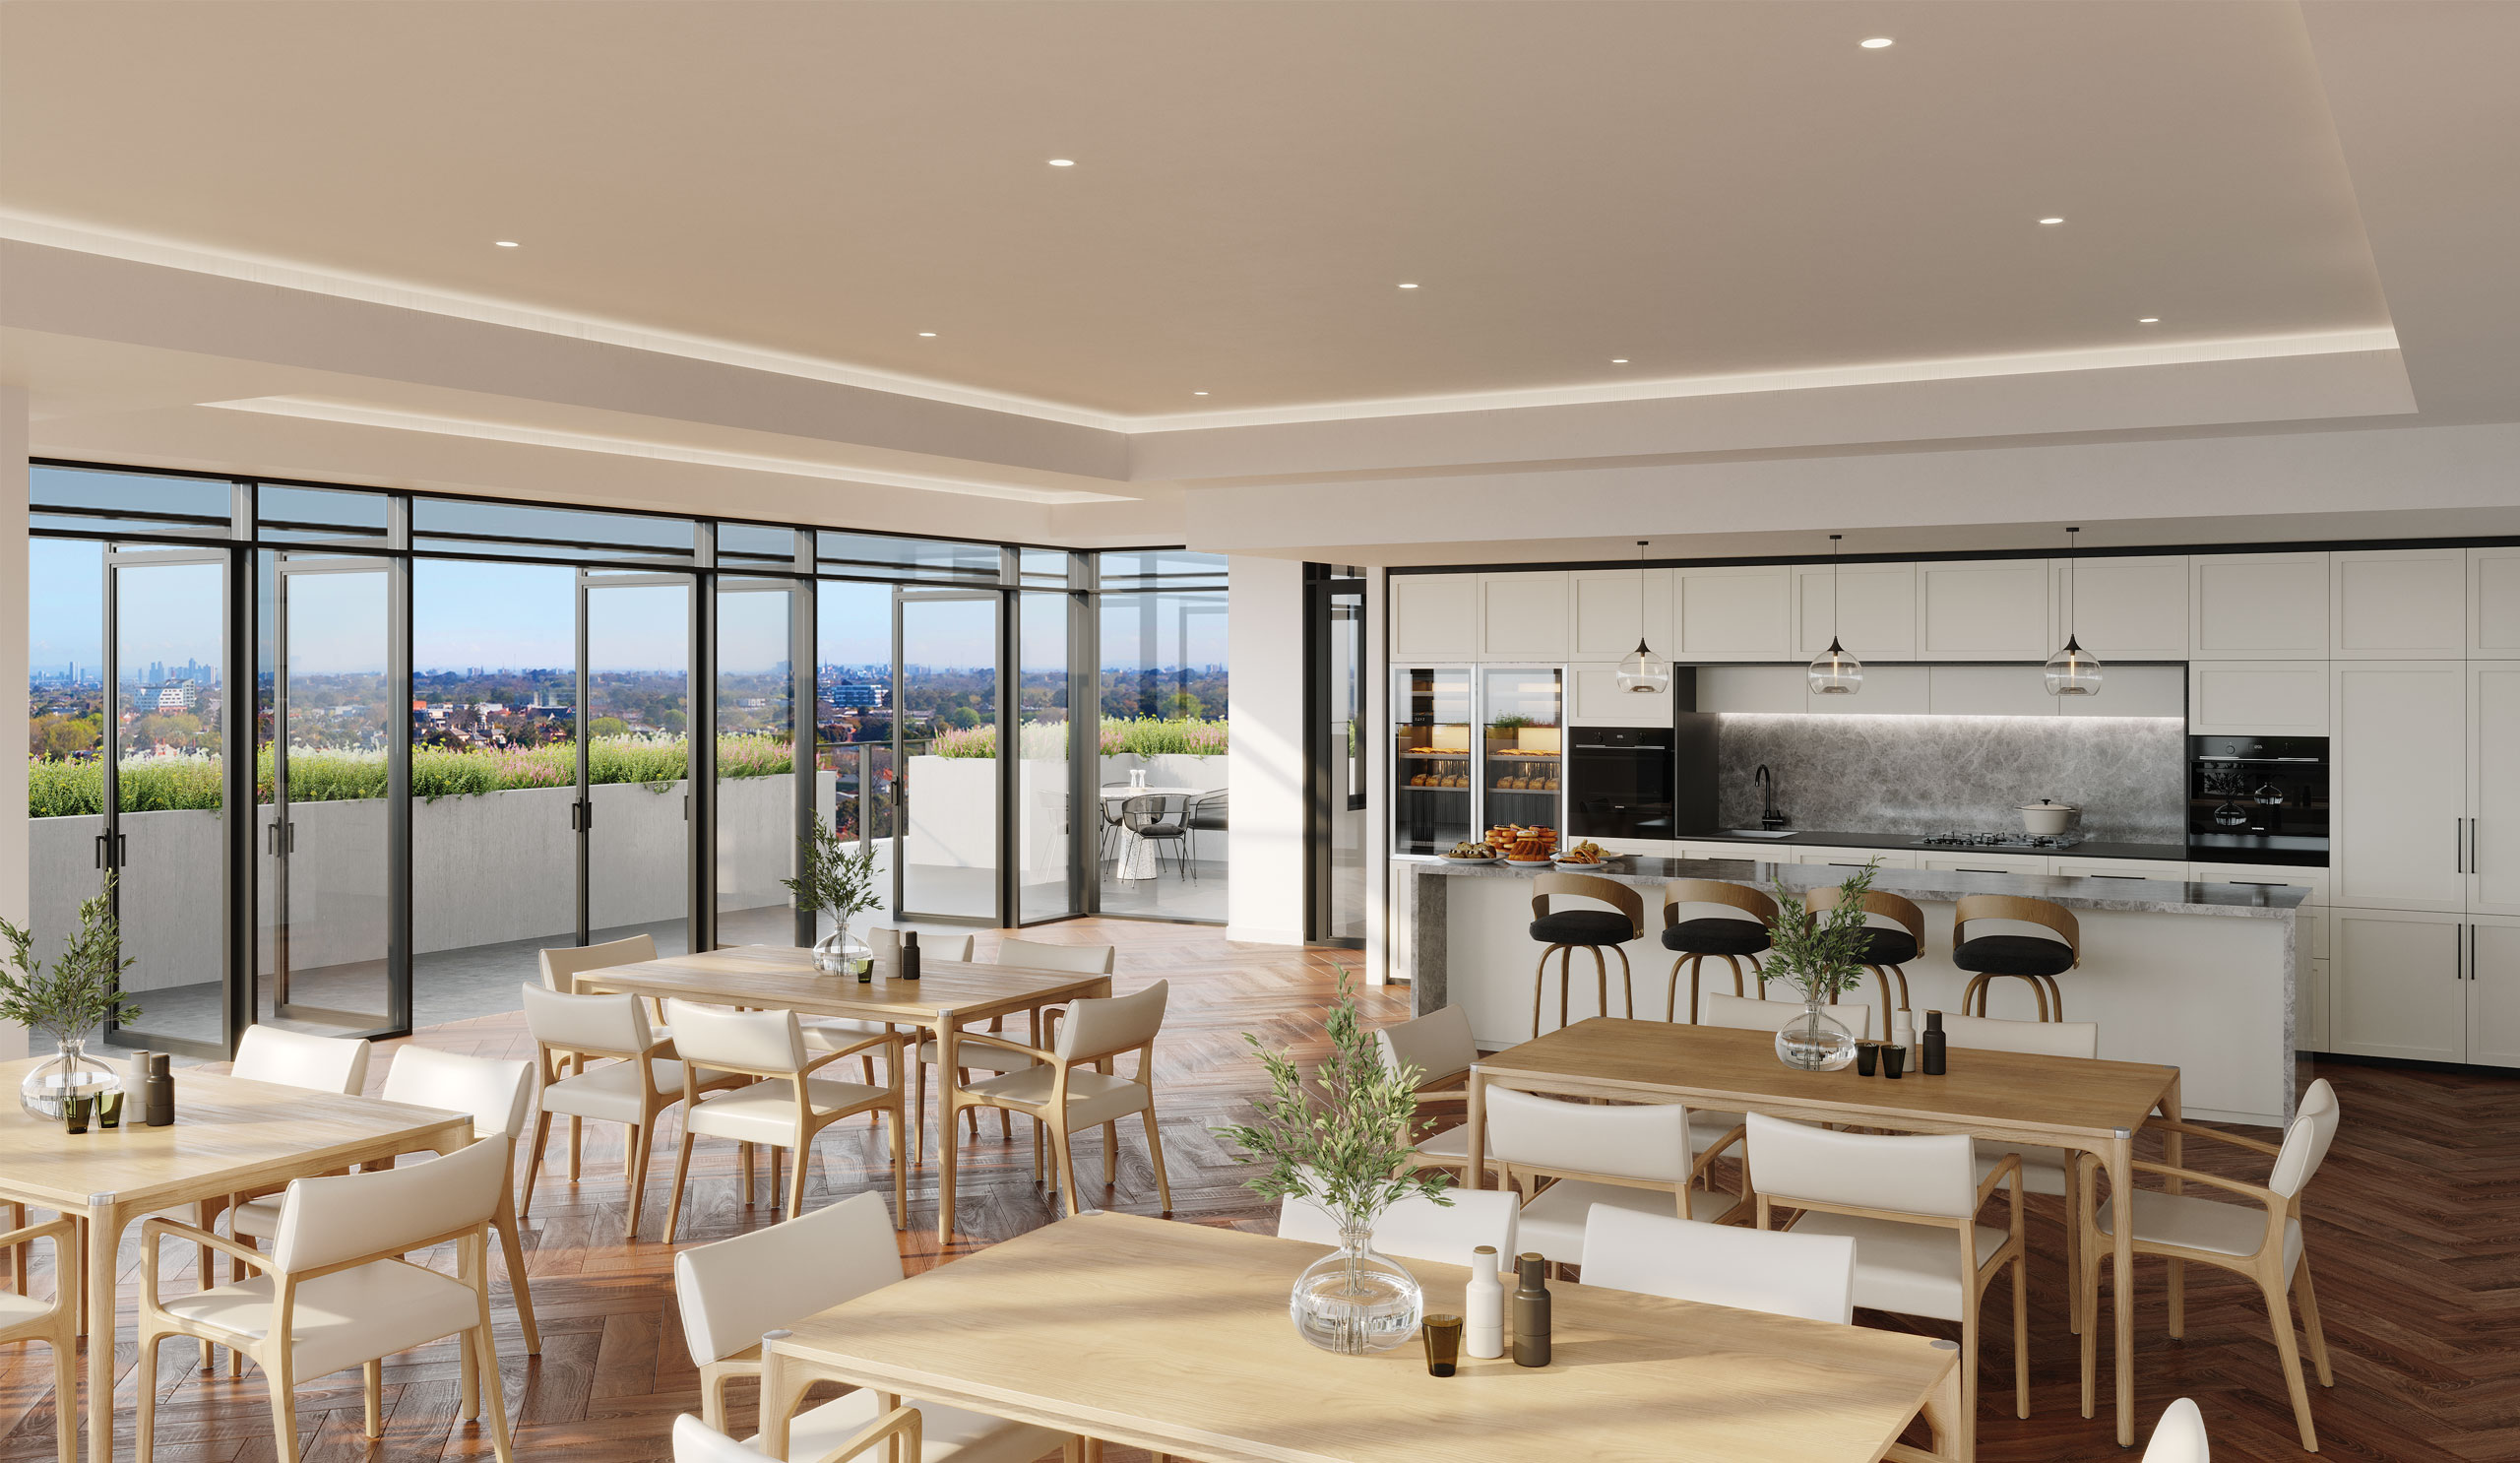 The community kitchen and function space opens onto the terrace - artist impression